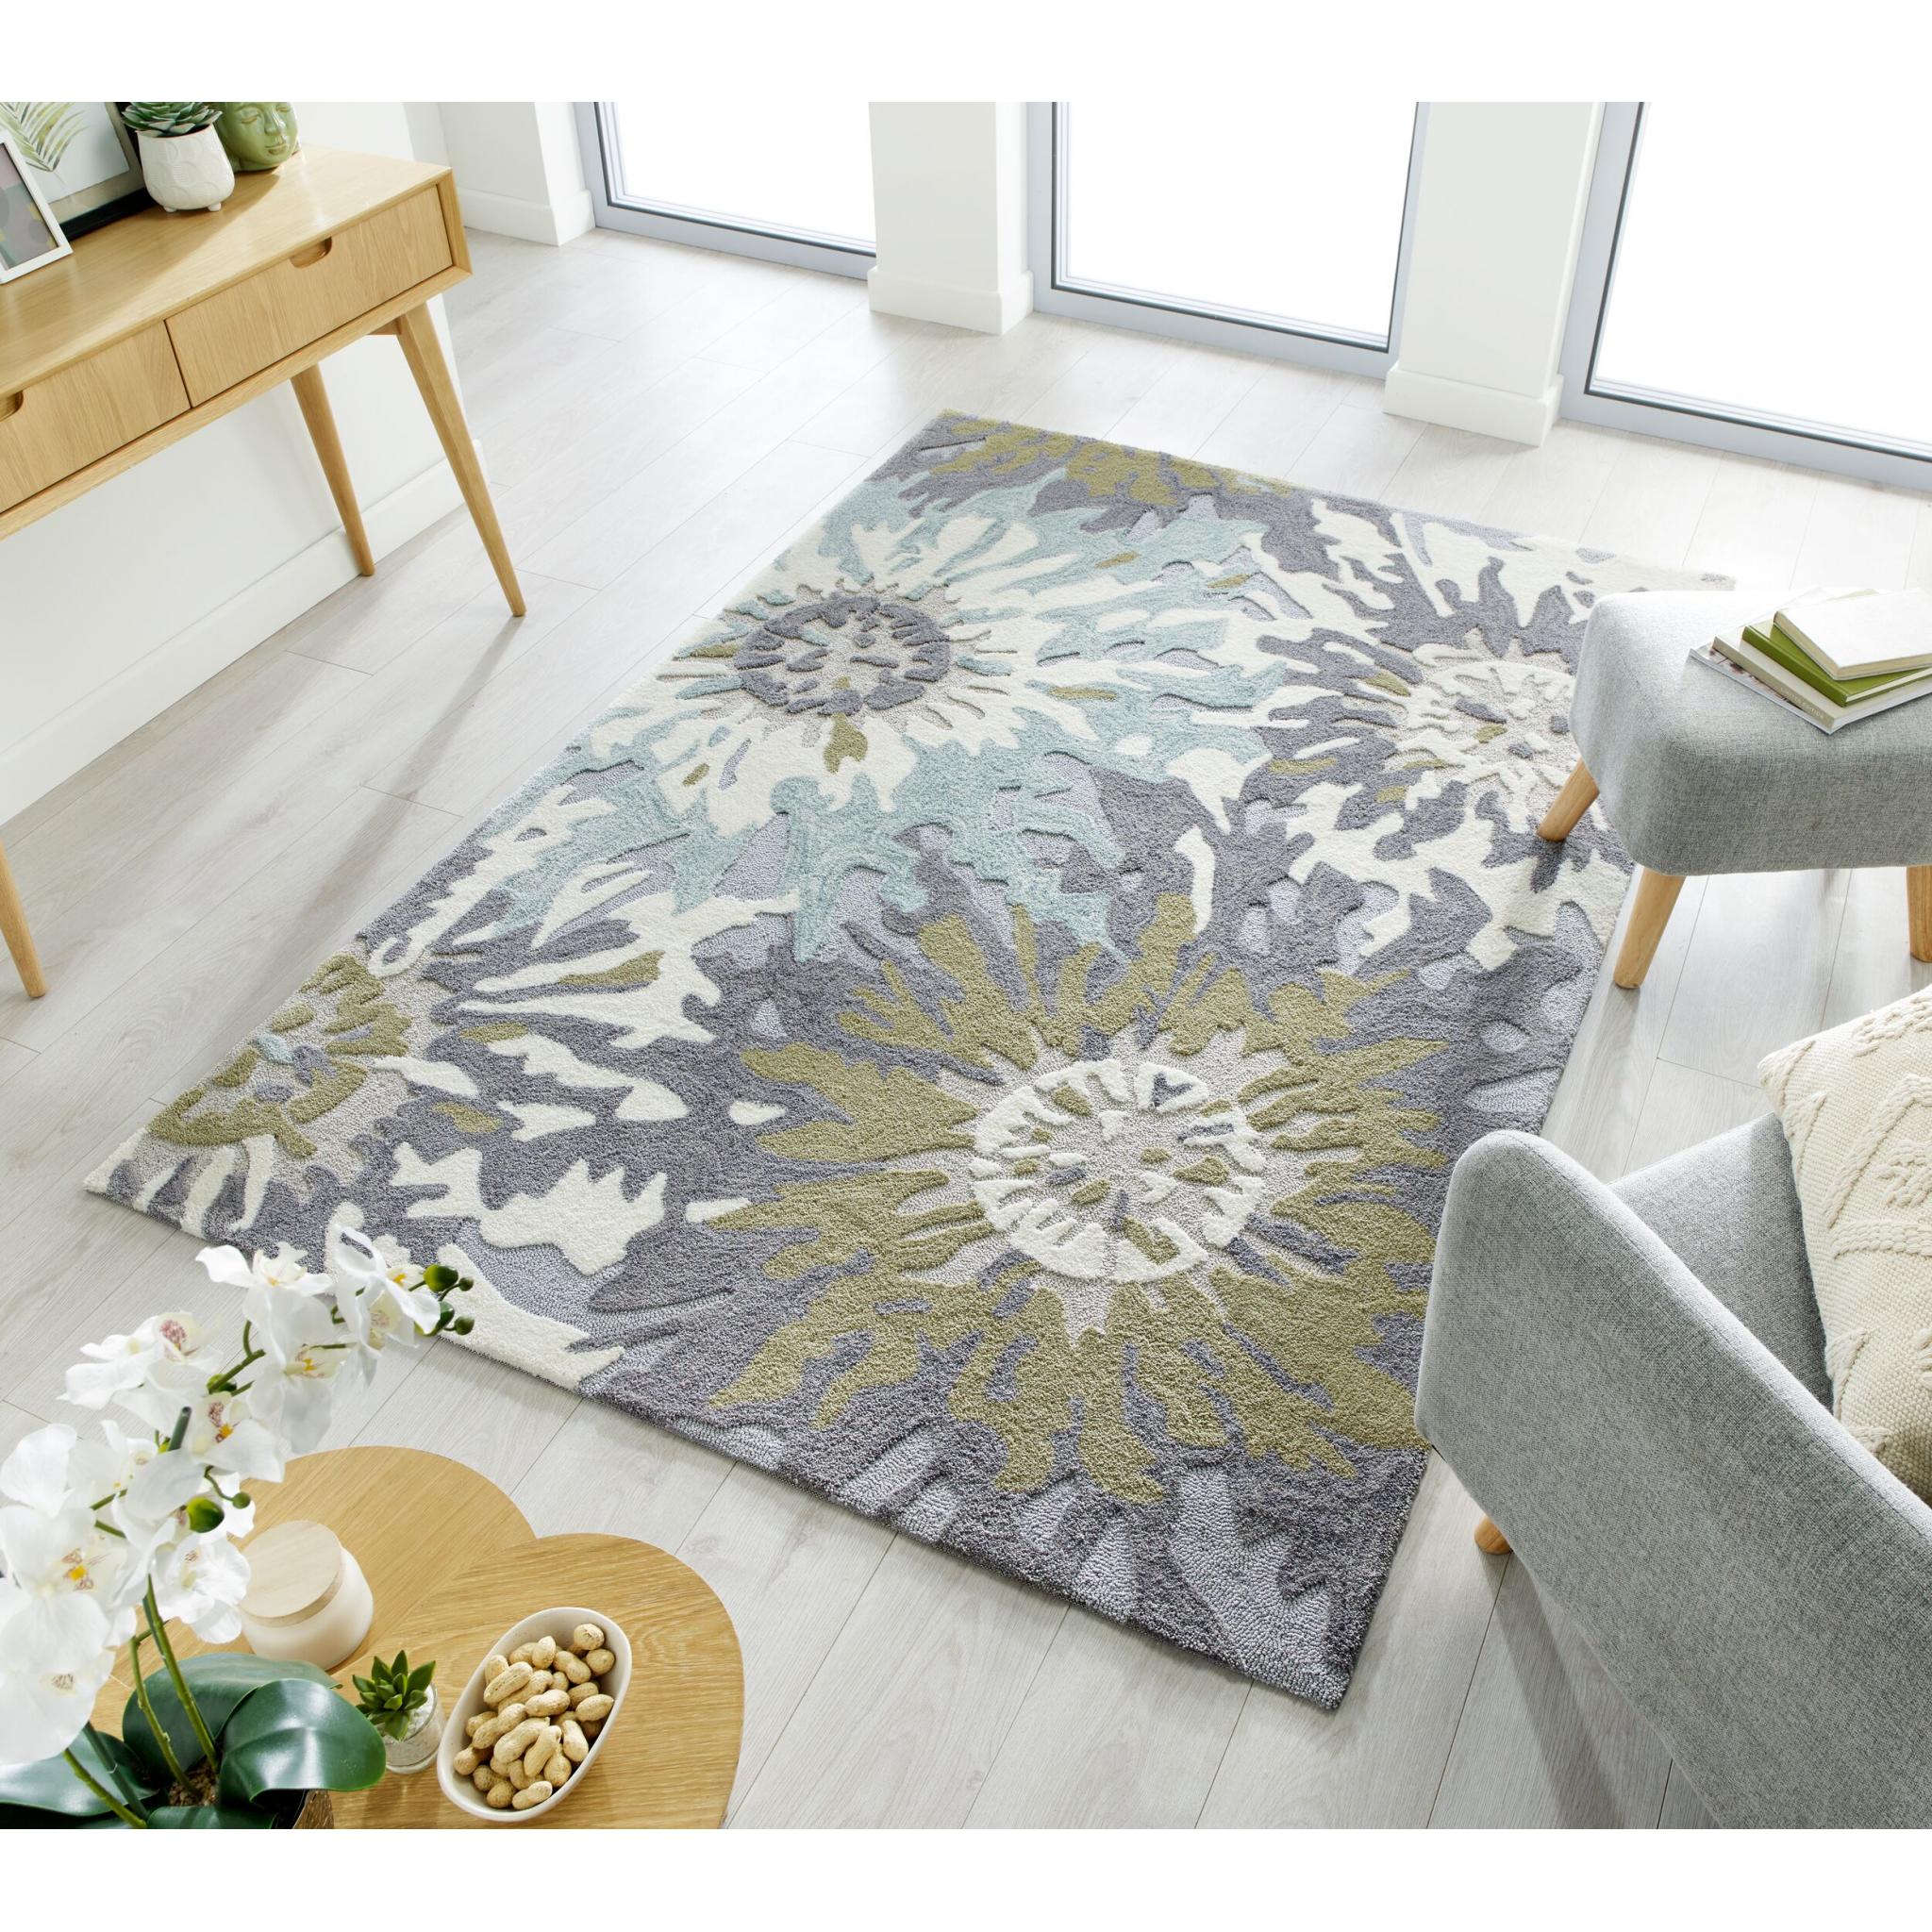 Zest Soft Fl Rugs In Green Grey, Grey And Green Rug